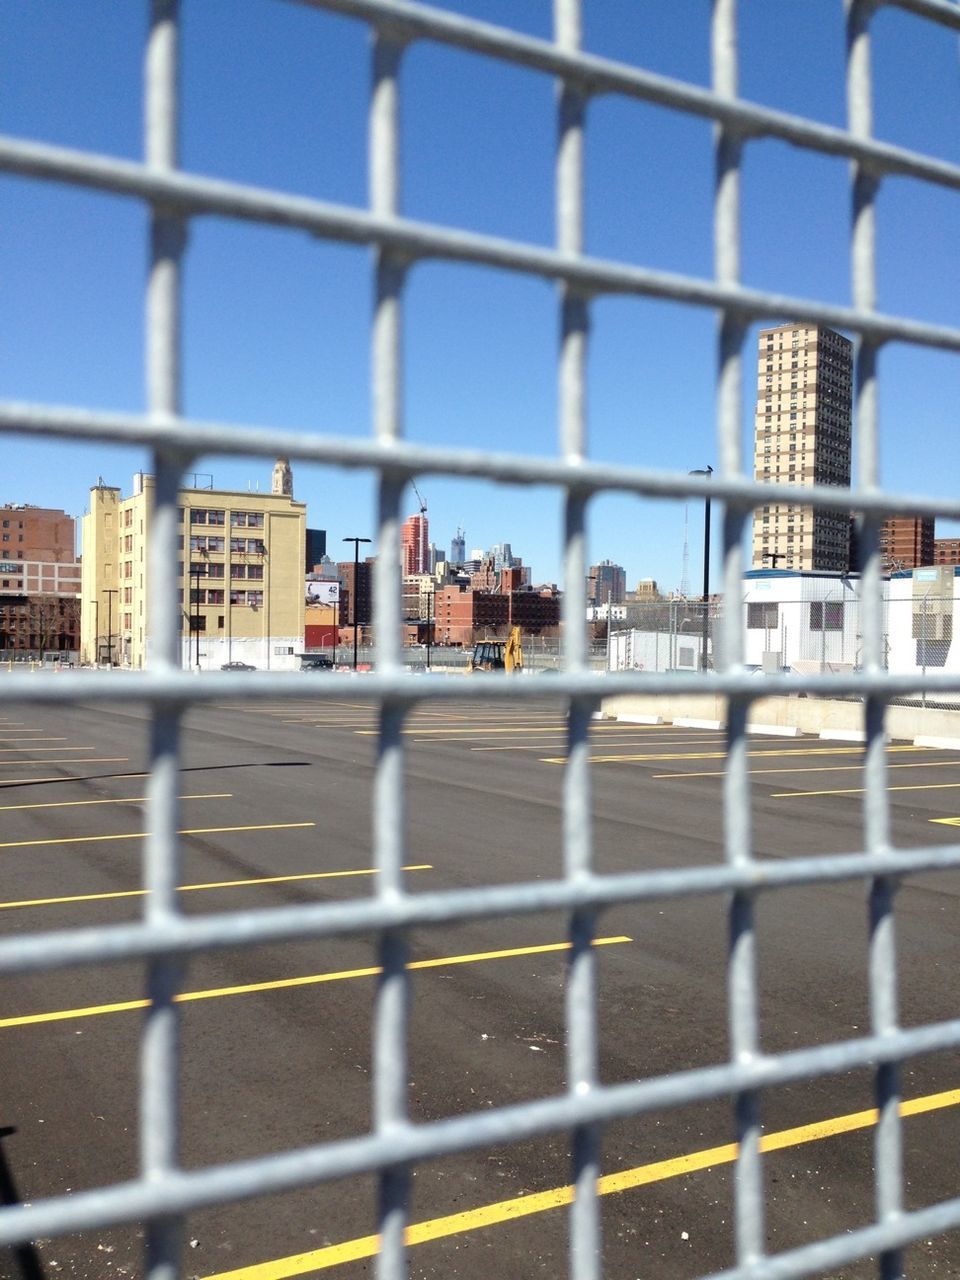 View through fence of street and buildings against blue sky